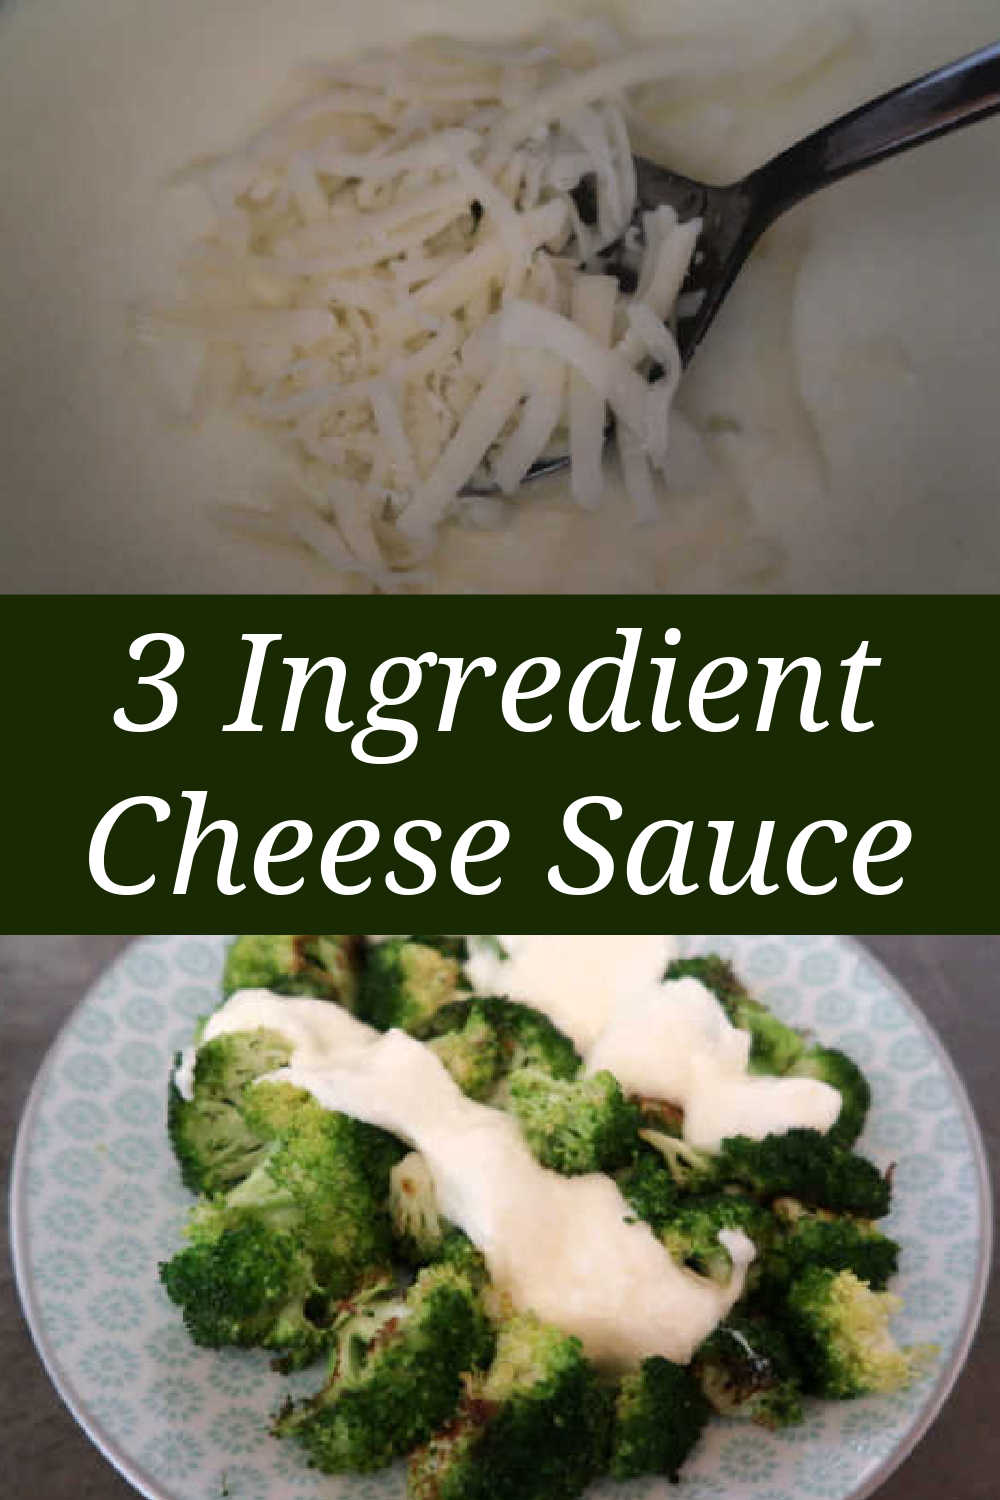 How To Make Cheese Sauce Without Flour - Quick and Simple Easy 3 Ingredient White Sauce Recipe Without Heavy Cream for broccoli, vegetables, mac and cheese or nachos - With the video tutorial.